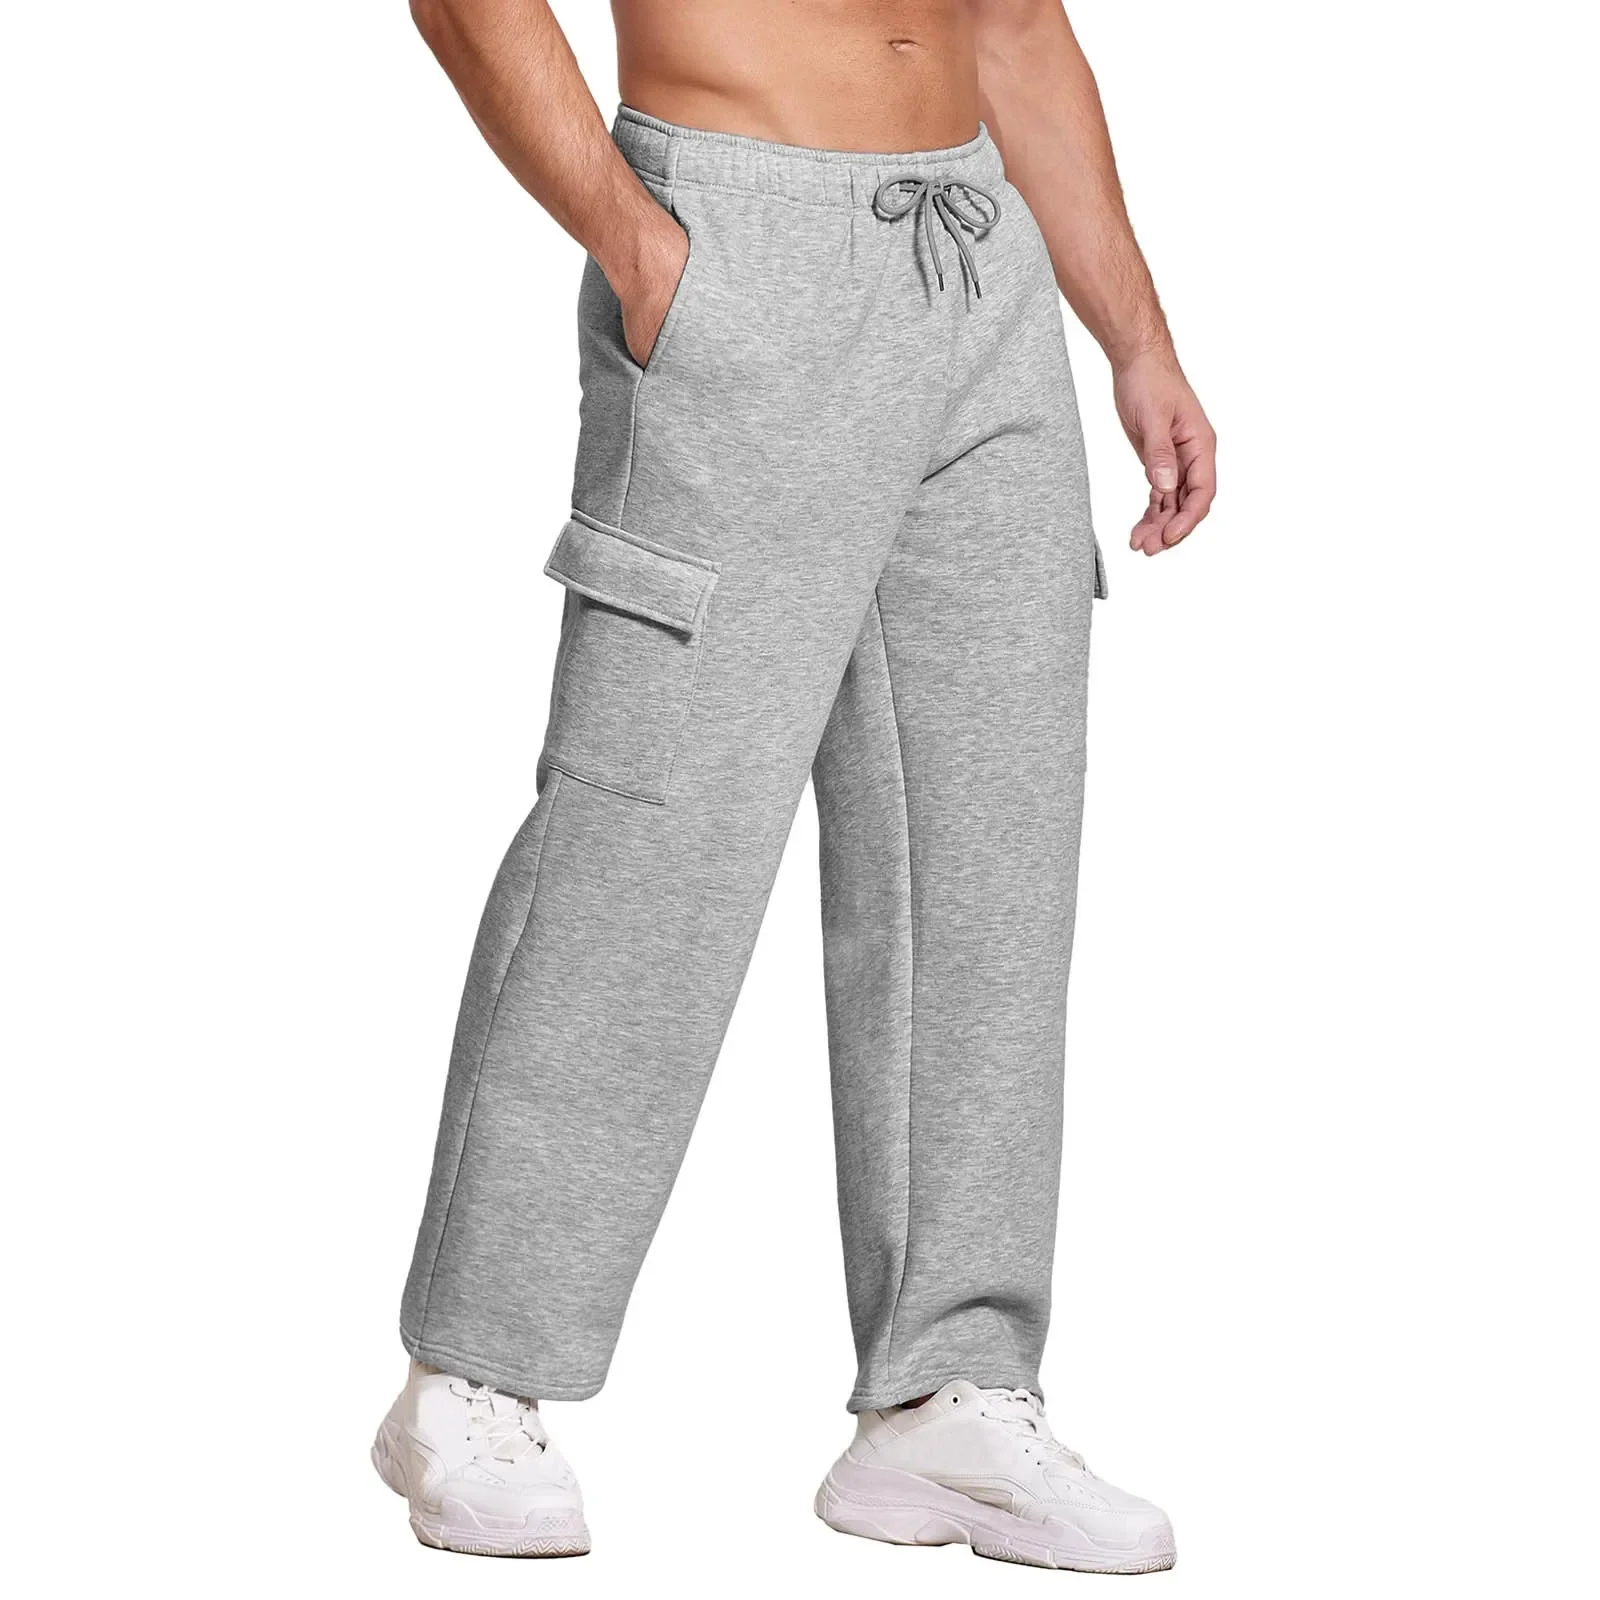 

Male Solid Color Sweatpants Casual Cargo Pants Sportswear Bottoms For Man Wide Leg Cotton Joggers With Pockets pantalones